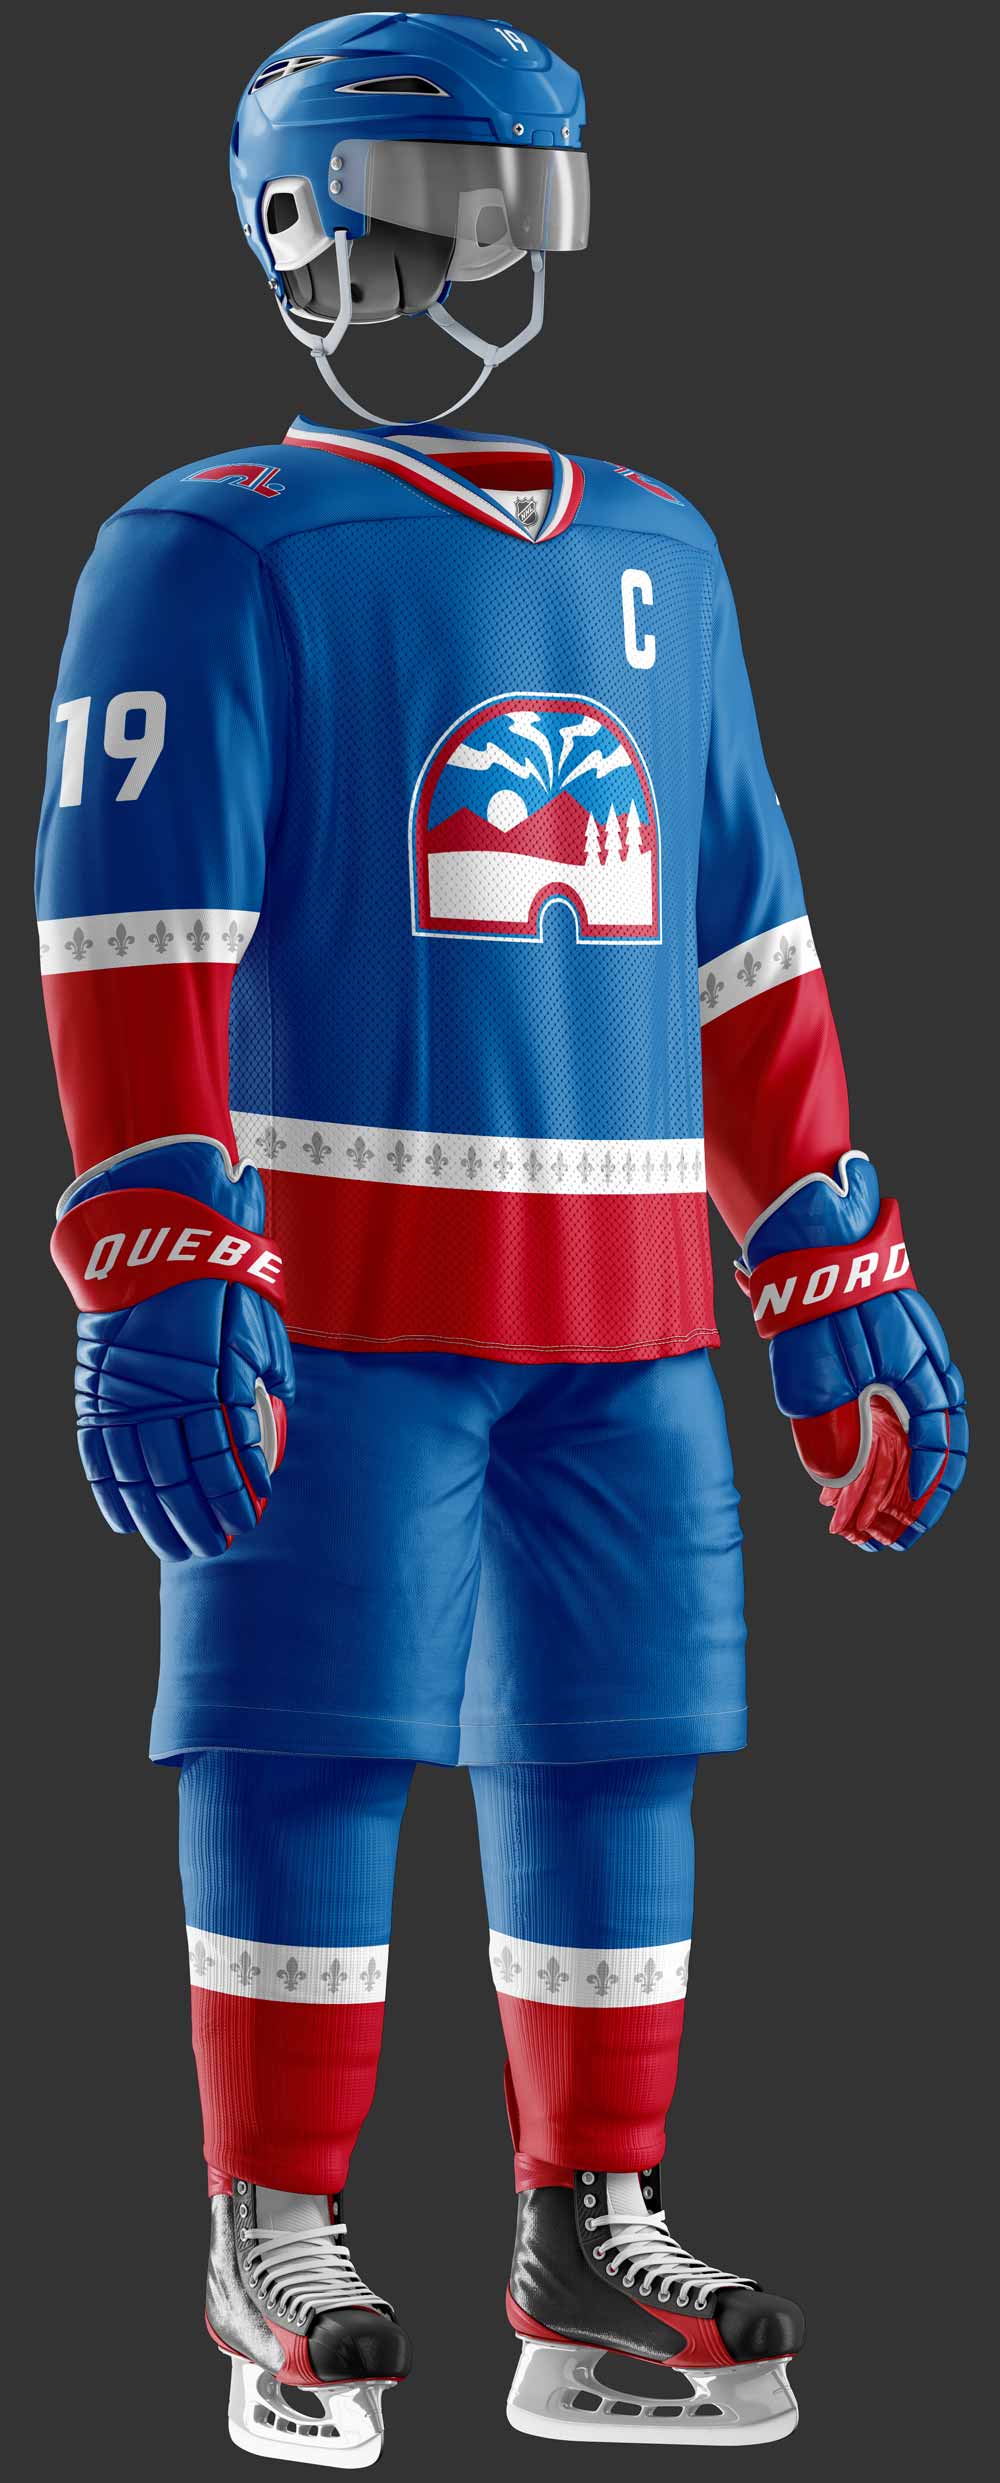 Quebec Nordiques Uniform - The crest increases in size, and the numbers are  now trimmed in red. (SportsLogos.Net)